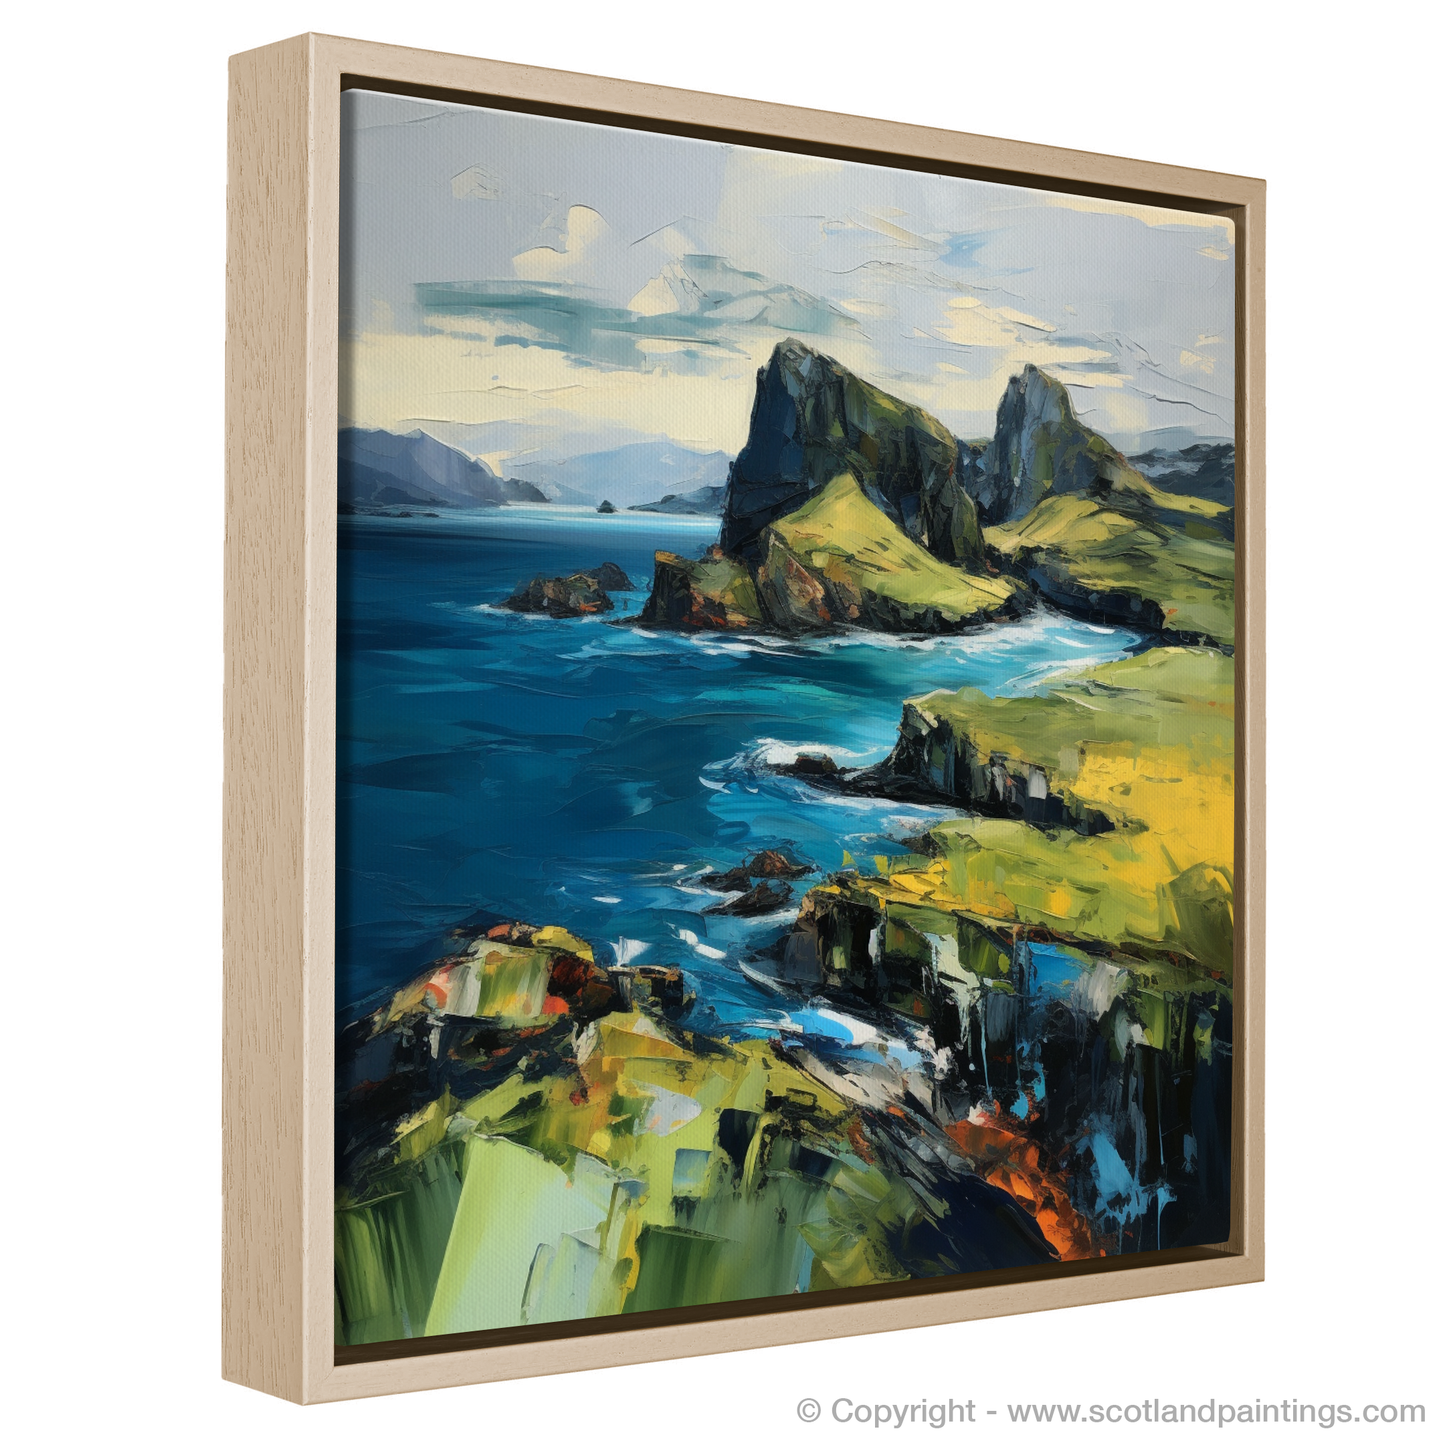 Painting and Art Print of Isle of Skye's smaller isles, Inner Hebrides entitled "Isle of Skye's Enchantment: An Expressionist Journey Through Land and Sea".